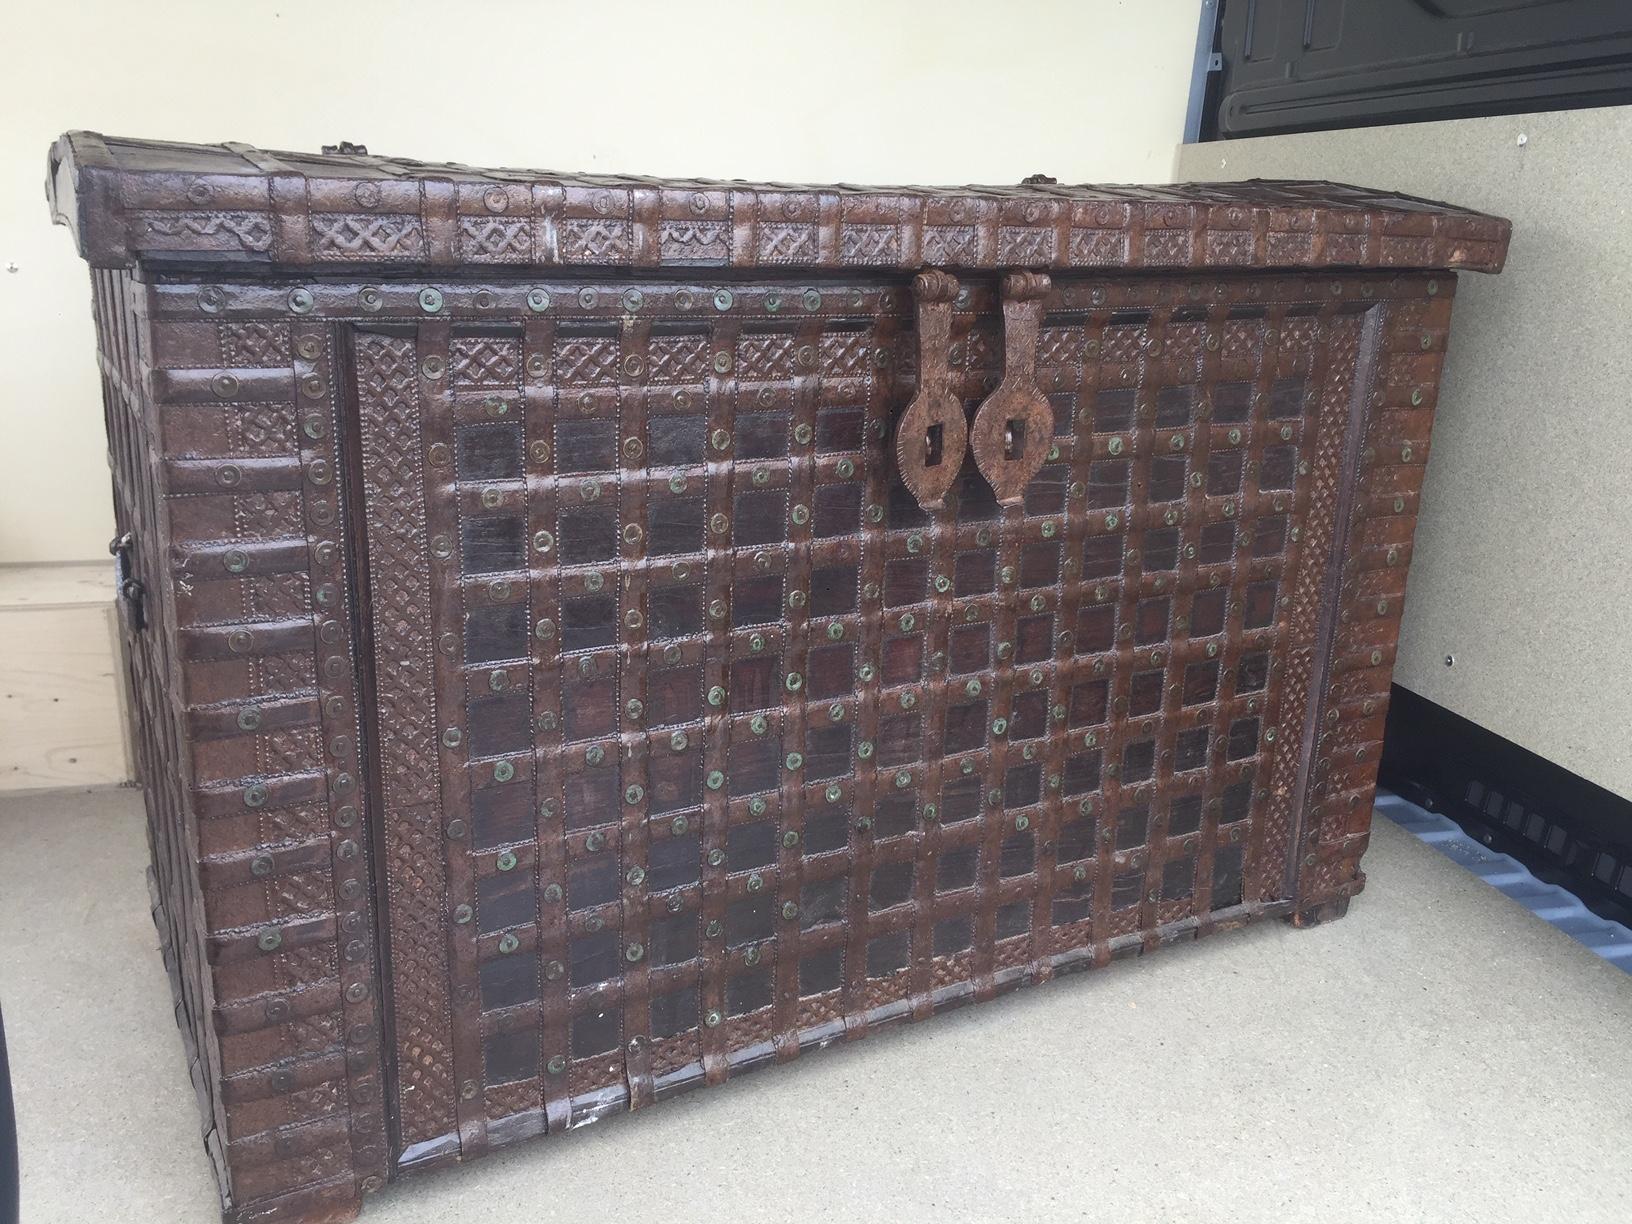 Beautiful 20th century Indian large iron and wood trunk. It was a wedding ornate trunk.
Two iron latticework to close the trunk. Two handles on each extremities.